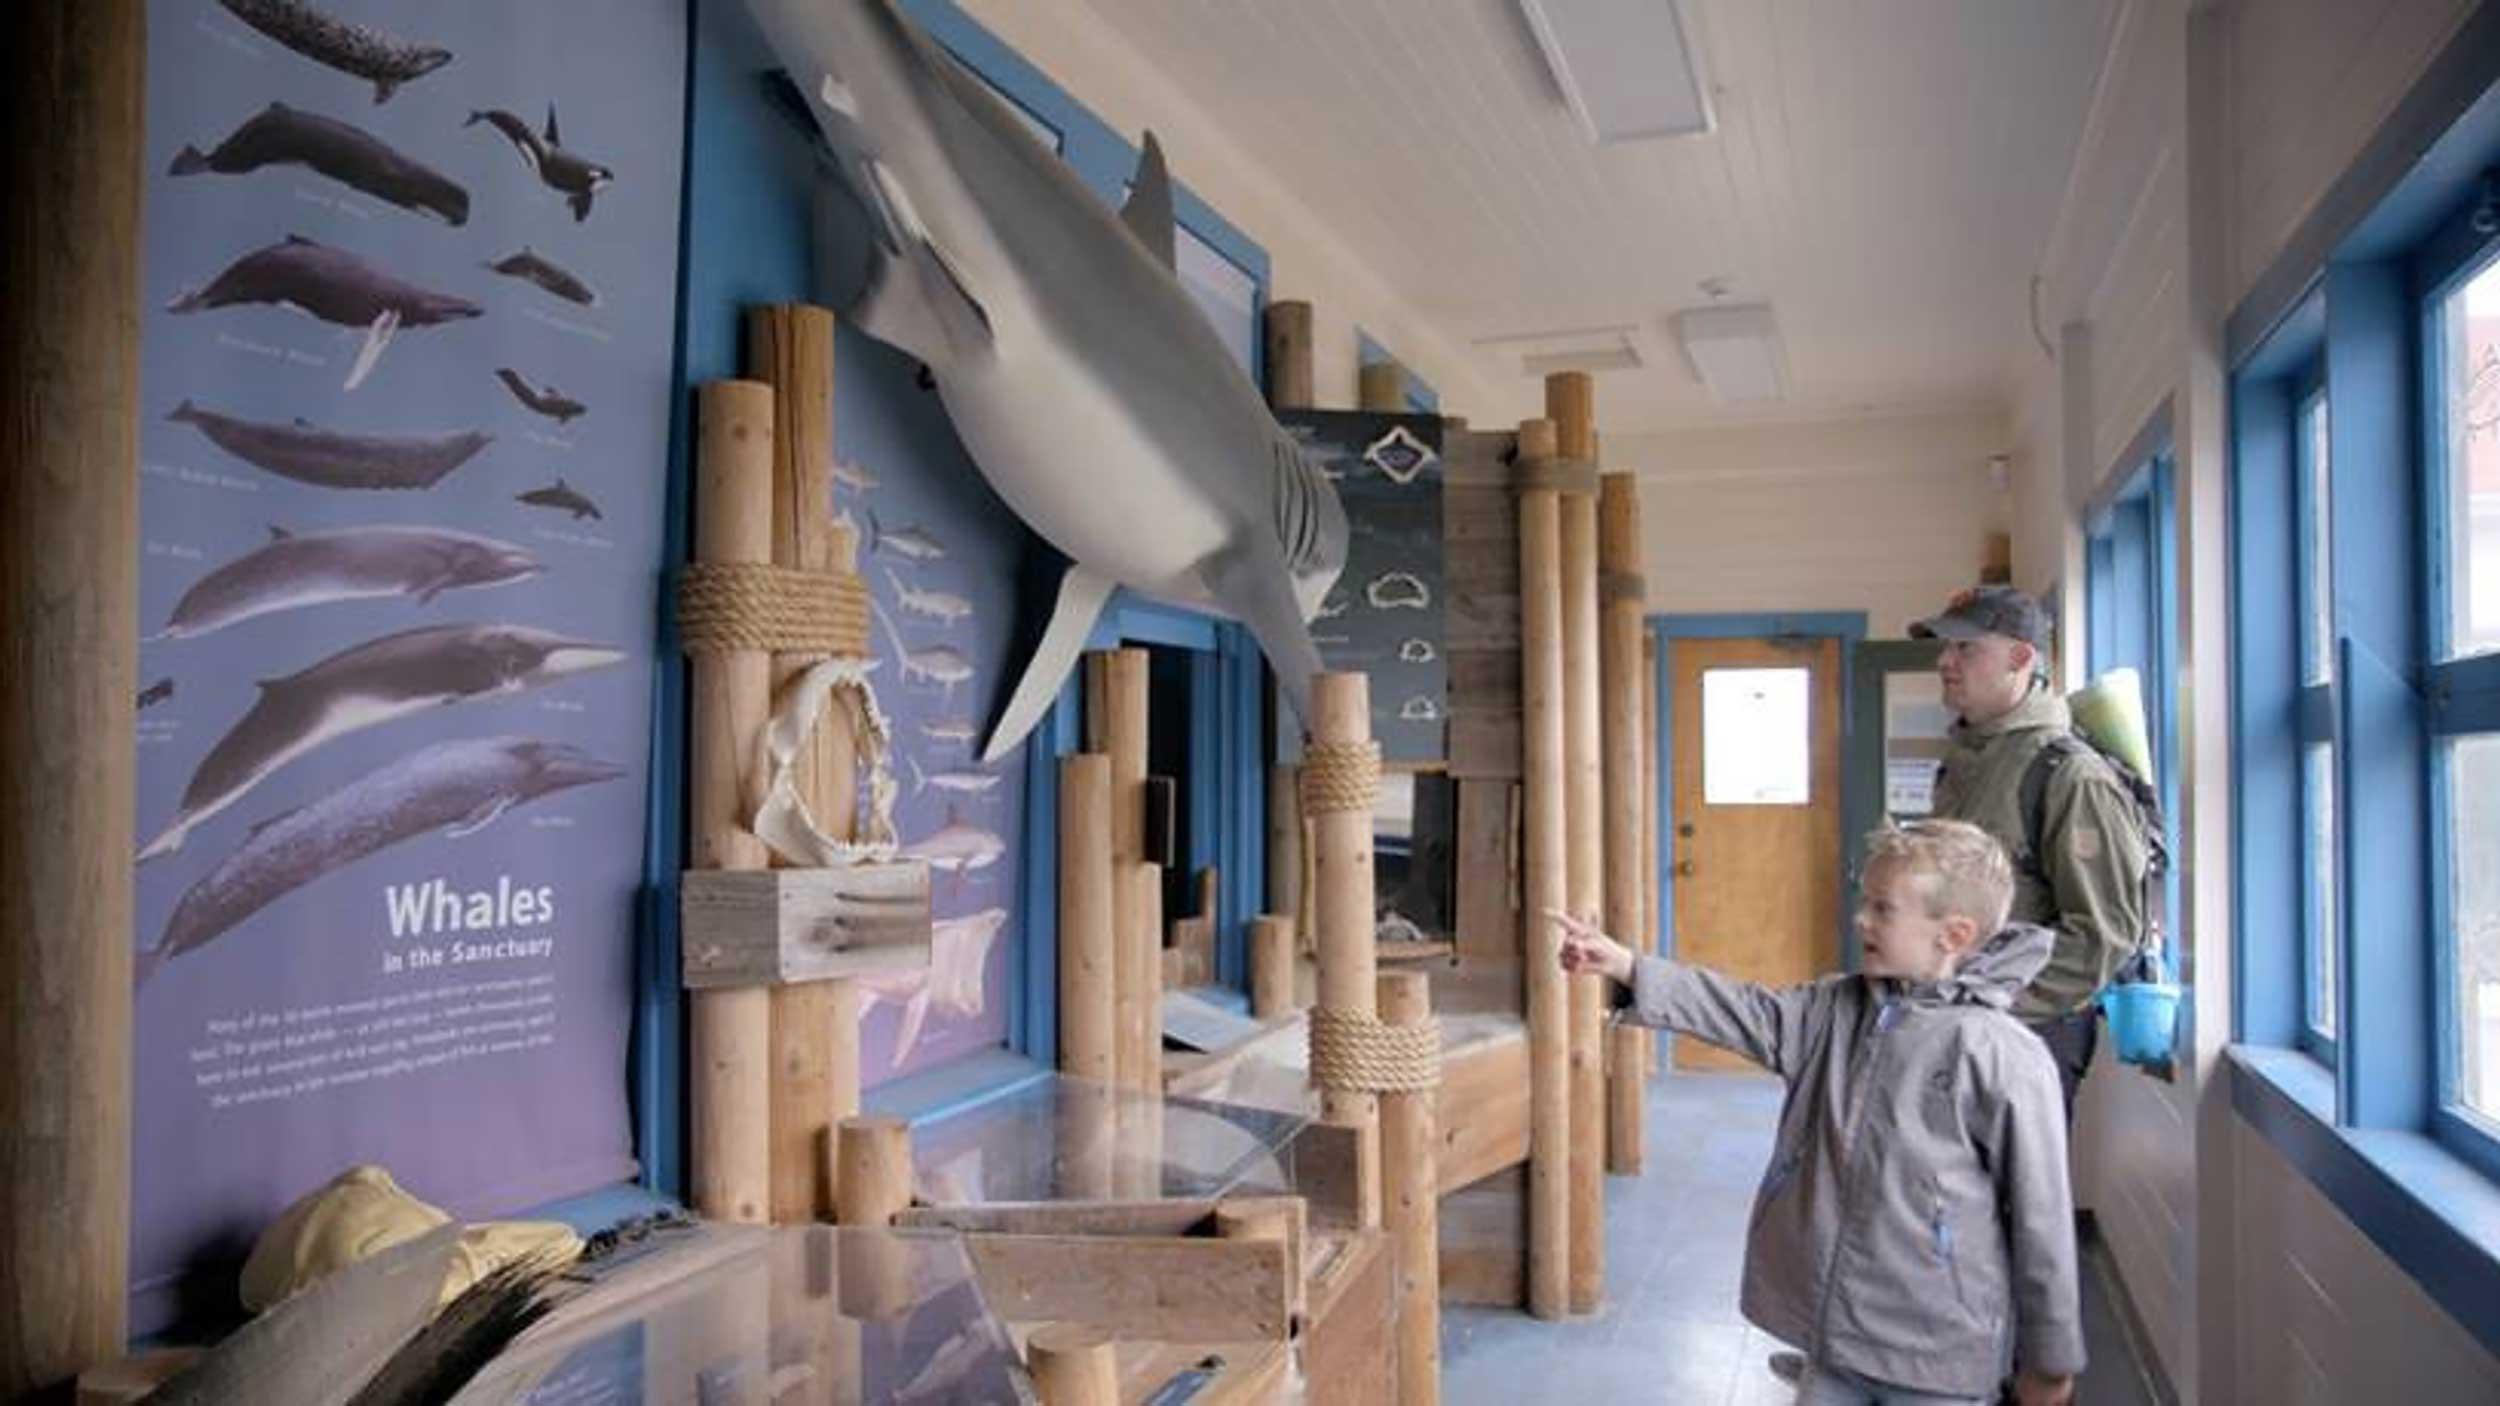 A man and boy look at exhibits at the Farallones Visitor Center. Photo by Blue Cadet.